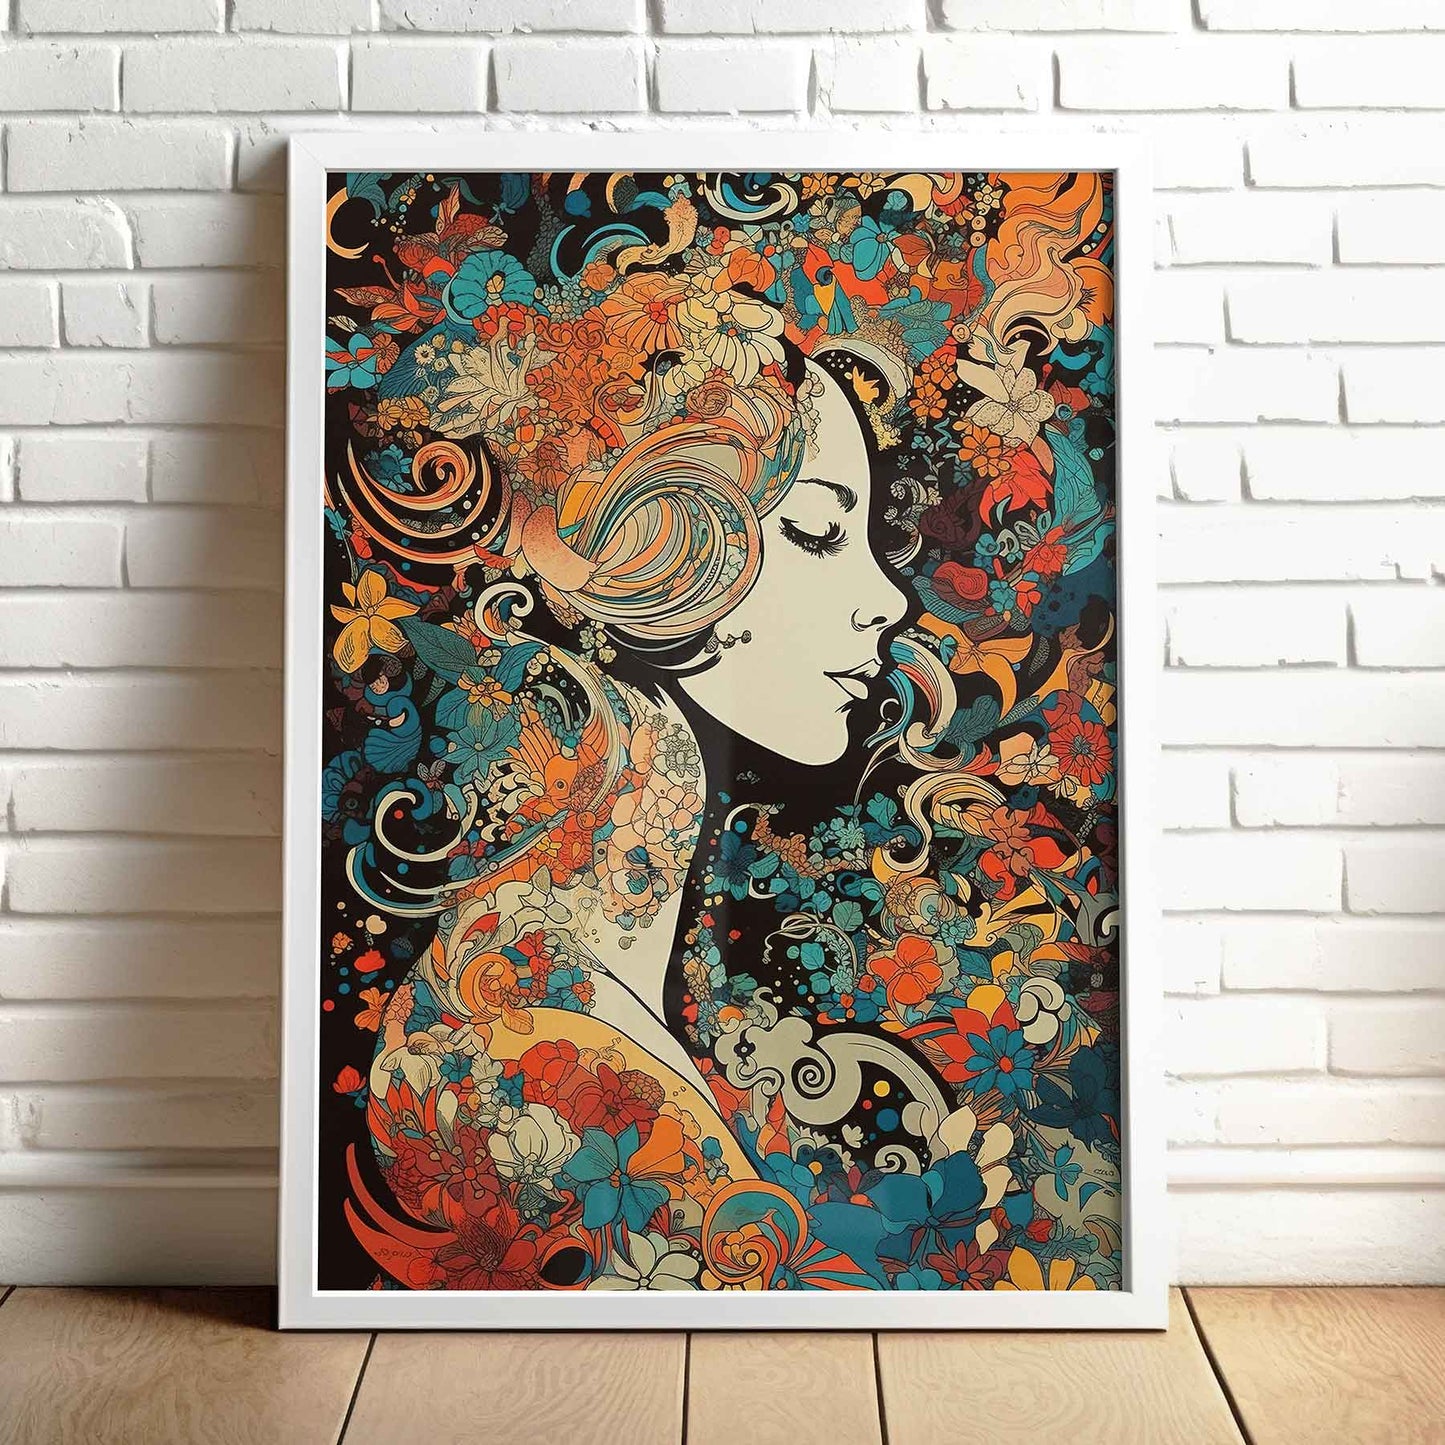 Framed Image of Vintage Art Nouveau Parisian 70s Psychedelic Wall Art Poster Print